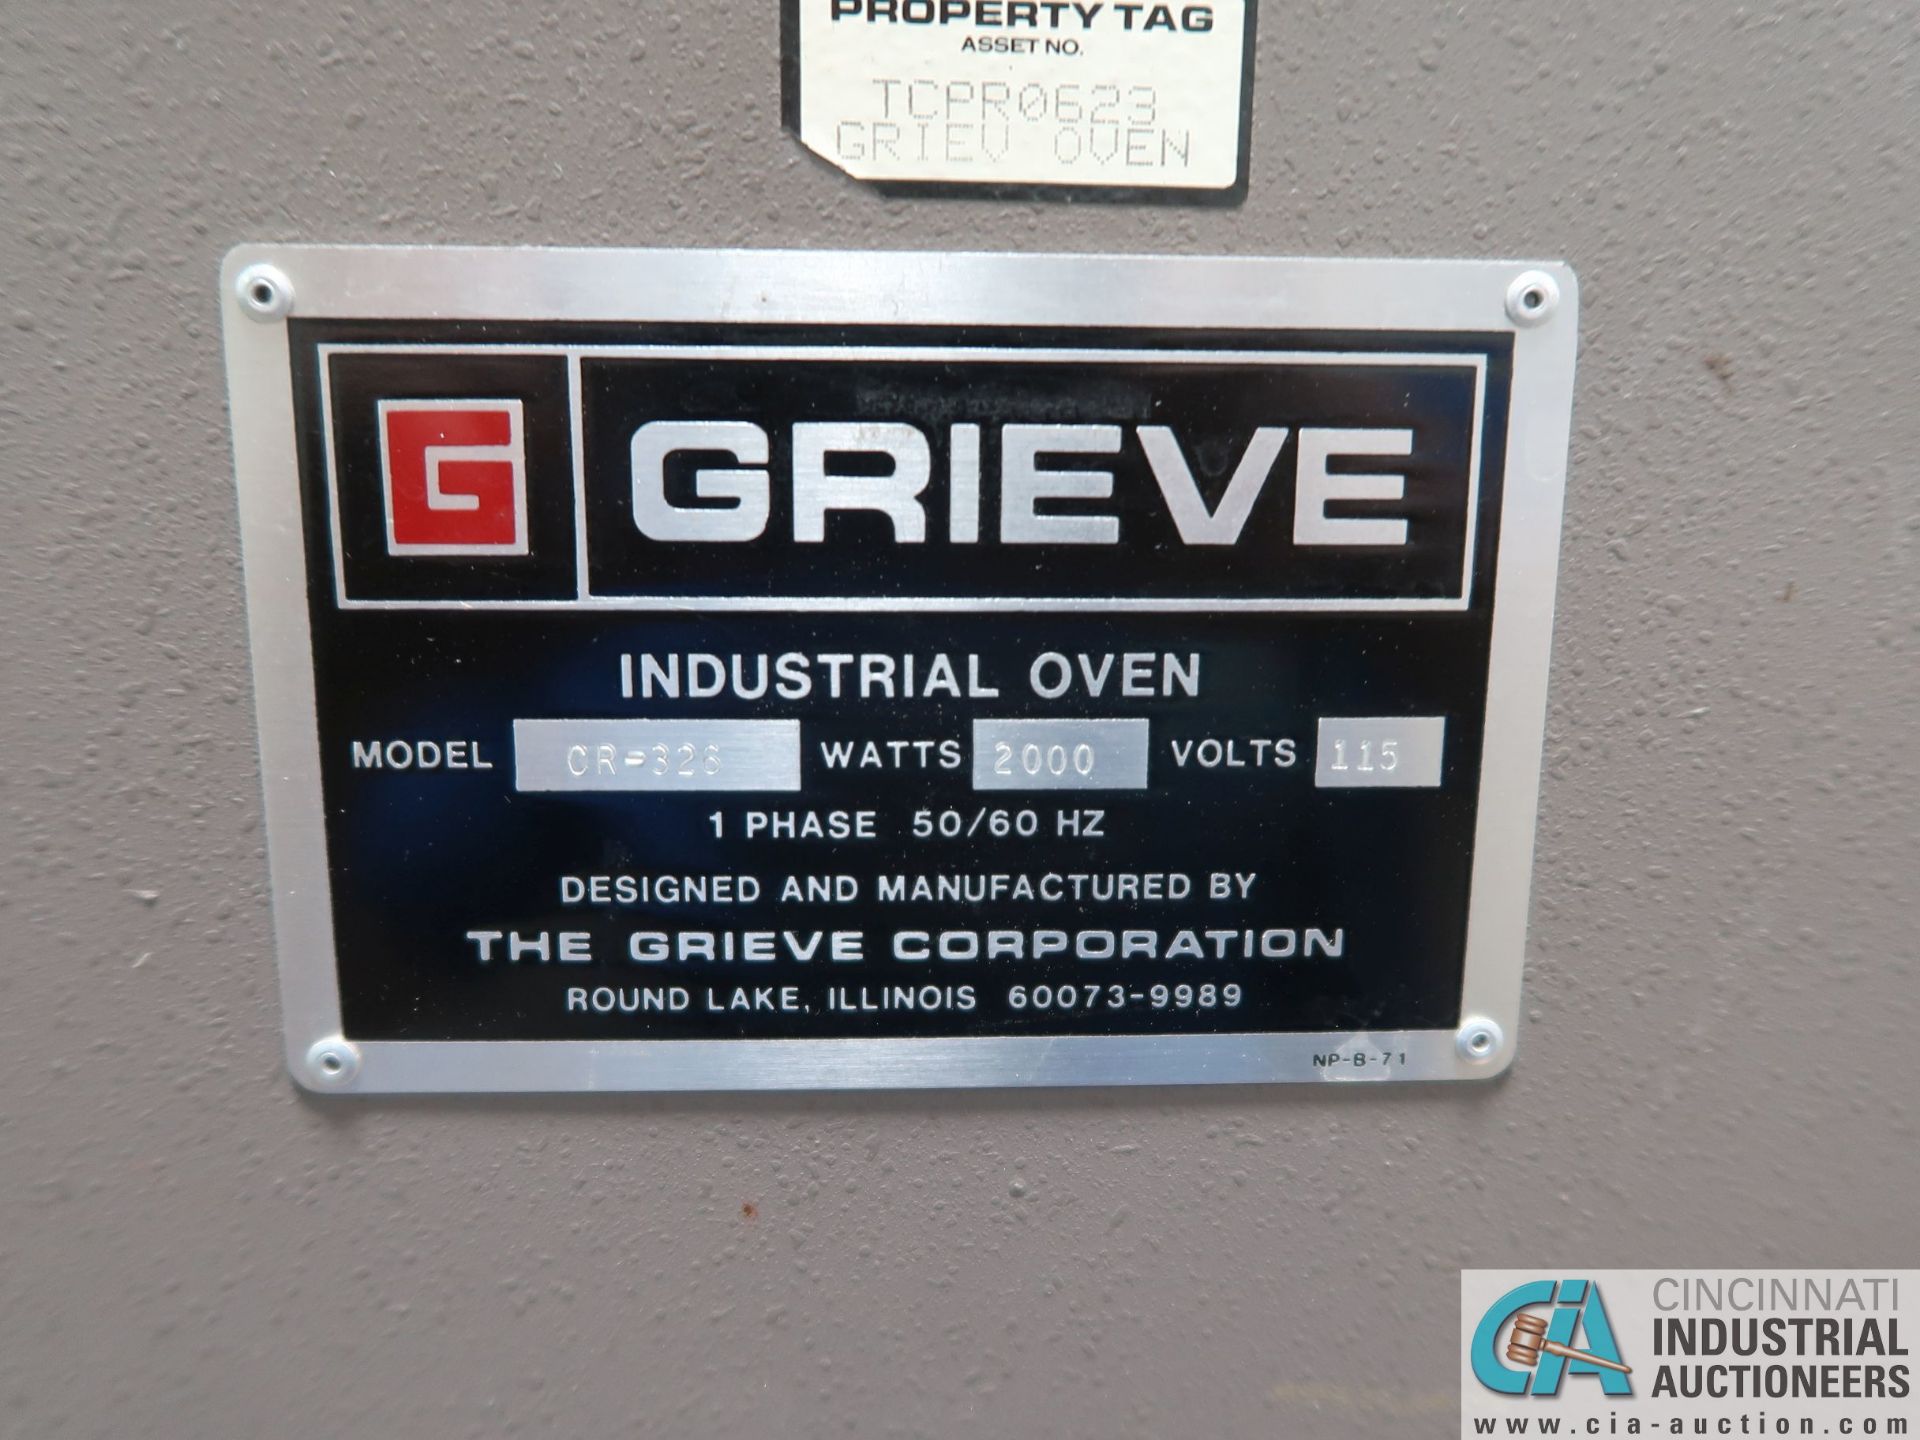 GRIEVE MODEL CR-326 ELECTRIC BENCH TYPE LAB OVEN, 450 DEGREE MAX. TEMP, CHAMBER DIMENSIONS: 28" LR X - Image 4 of 4